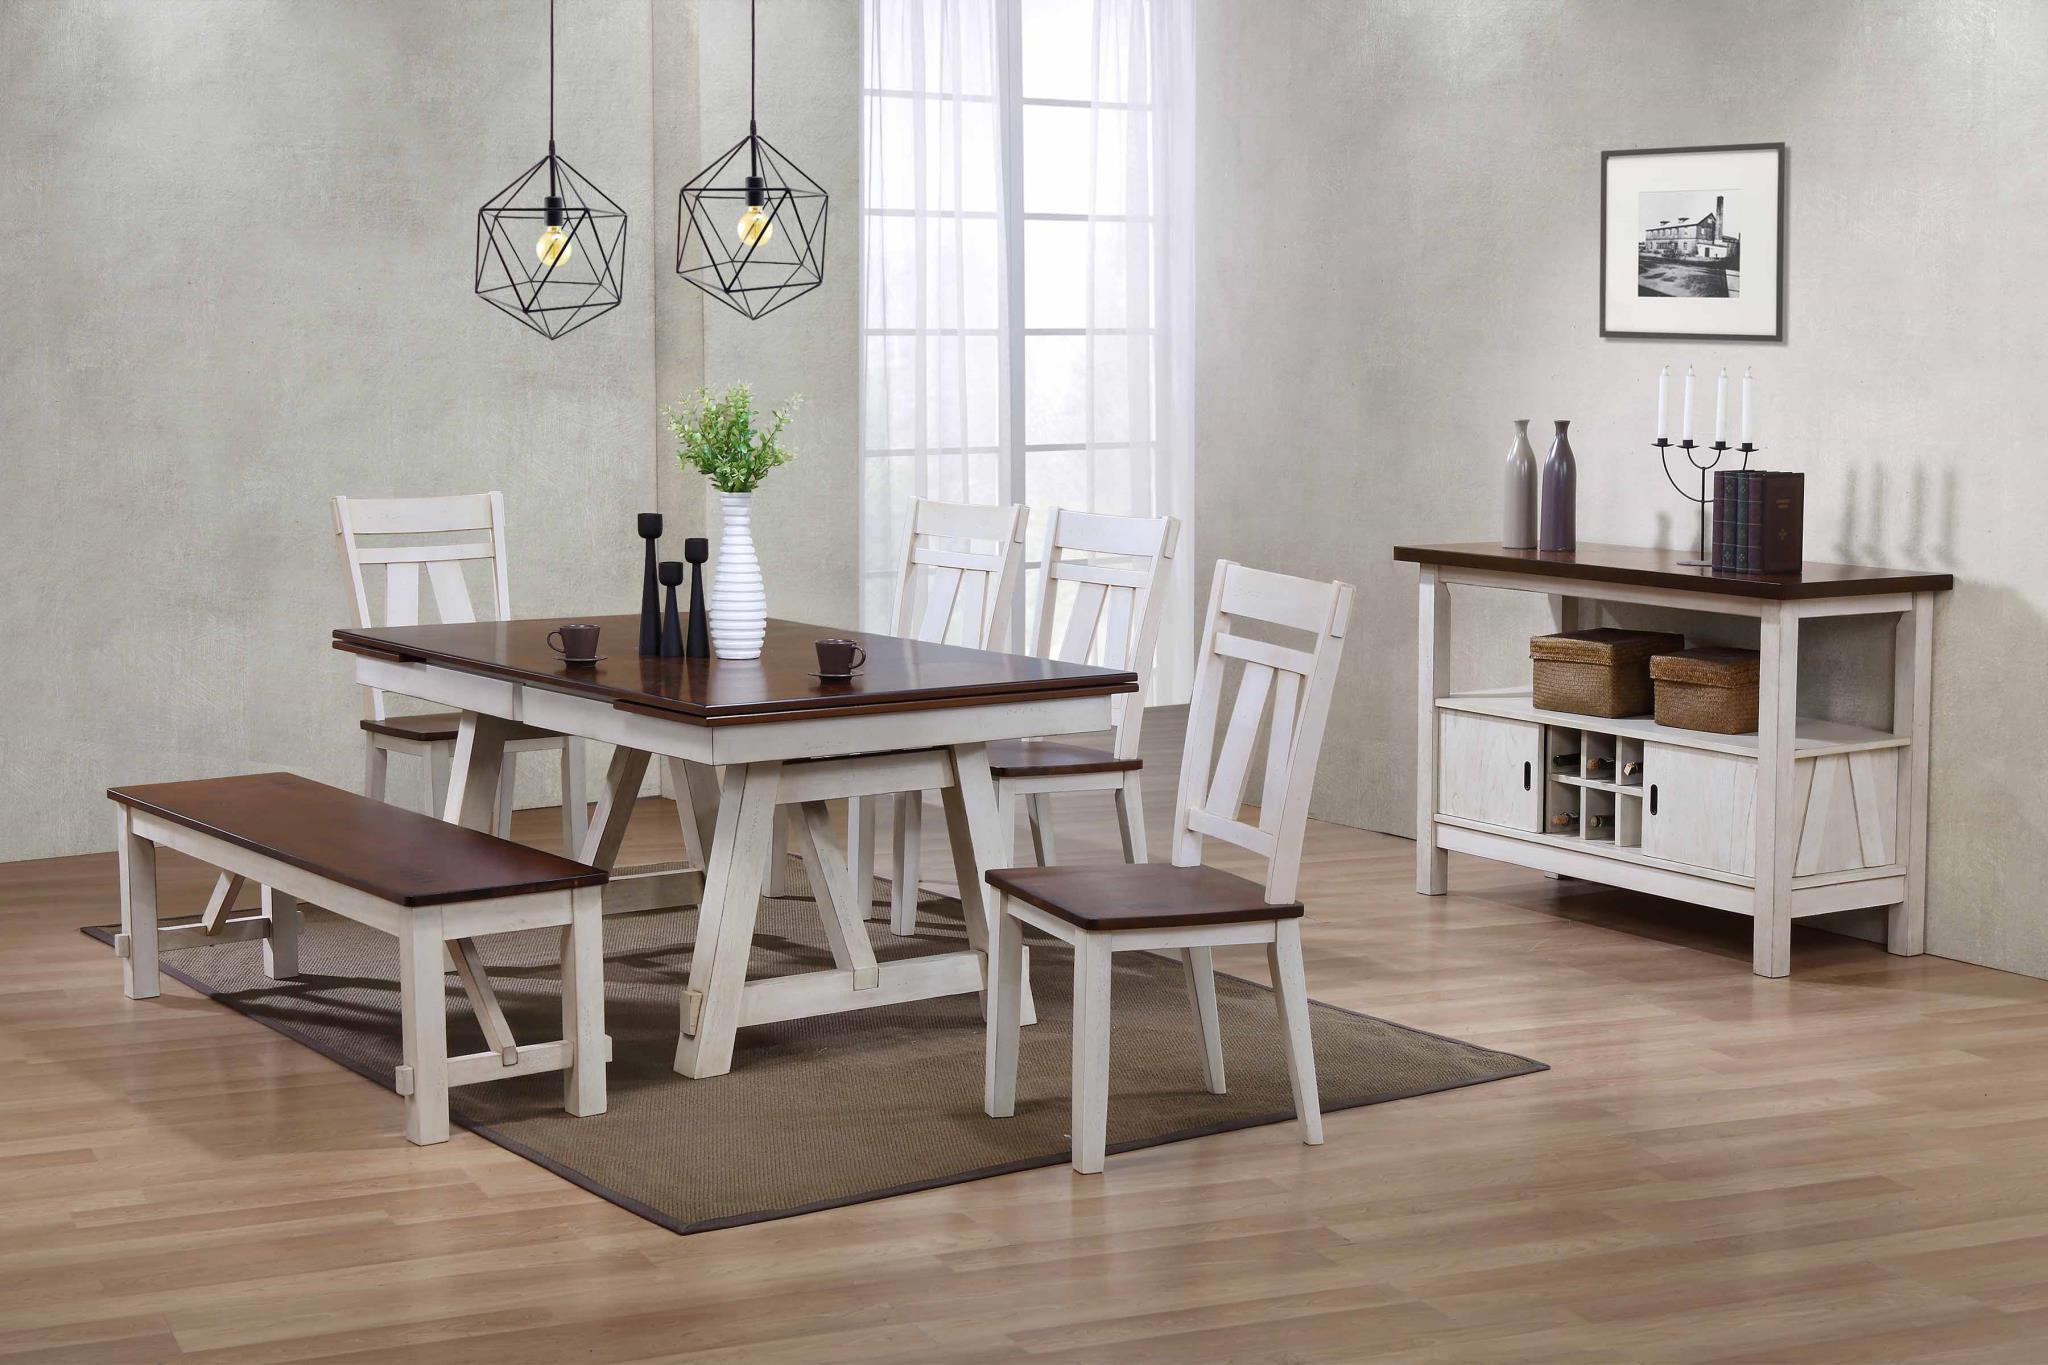 Rustic, Farmhouse Dining Table Winslow 5636 in Cream, Brown 